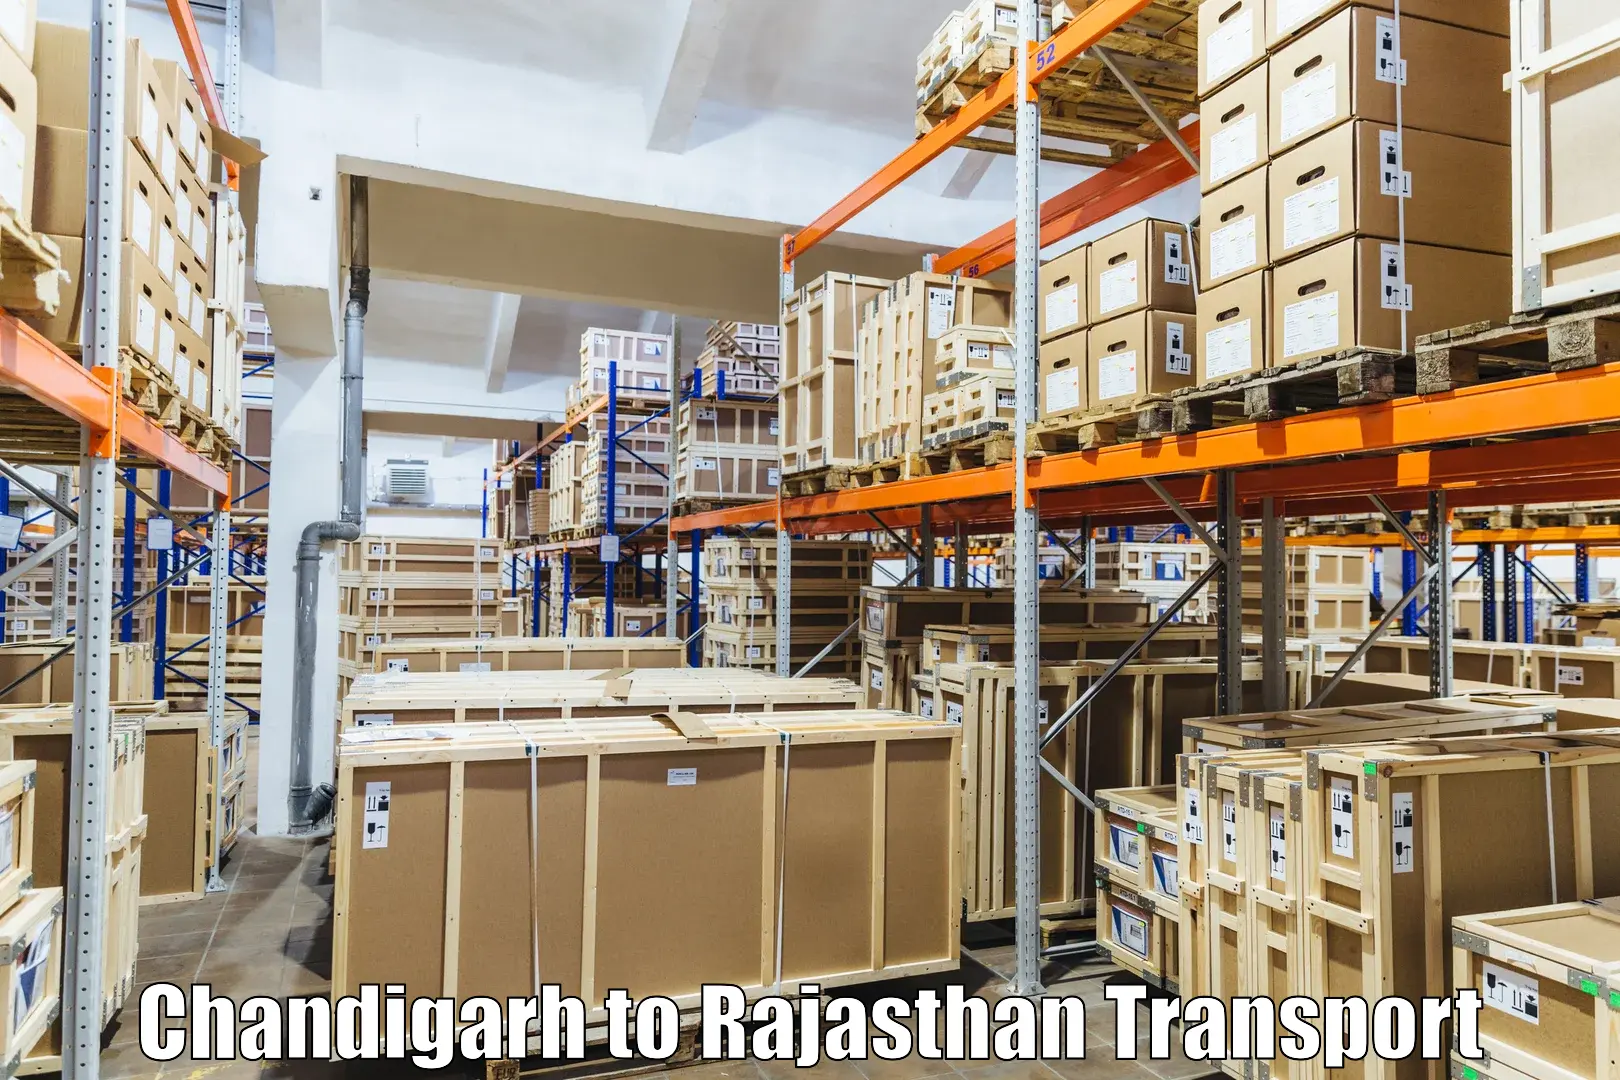 Package delivery services Chandigarh to Pratapgarh Rajasthan